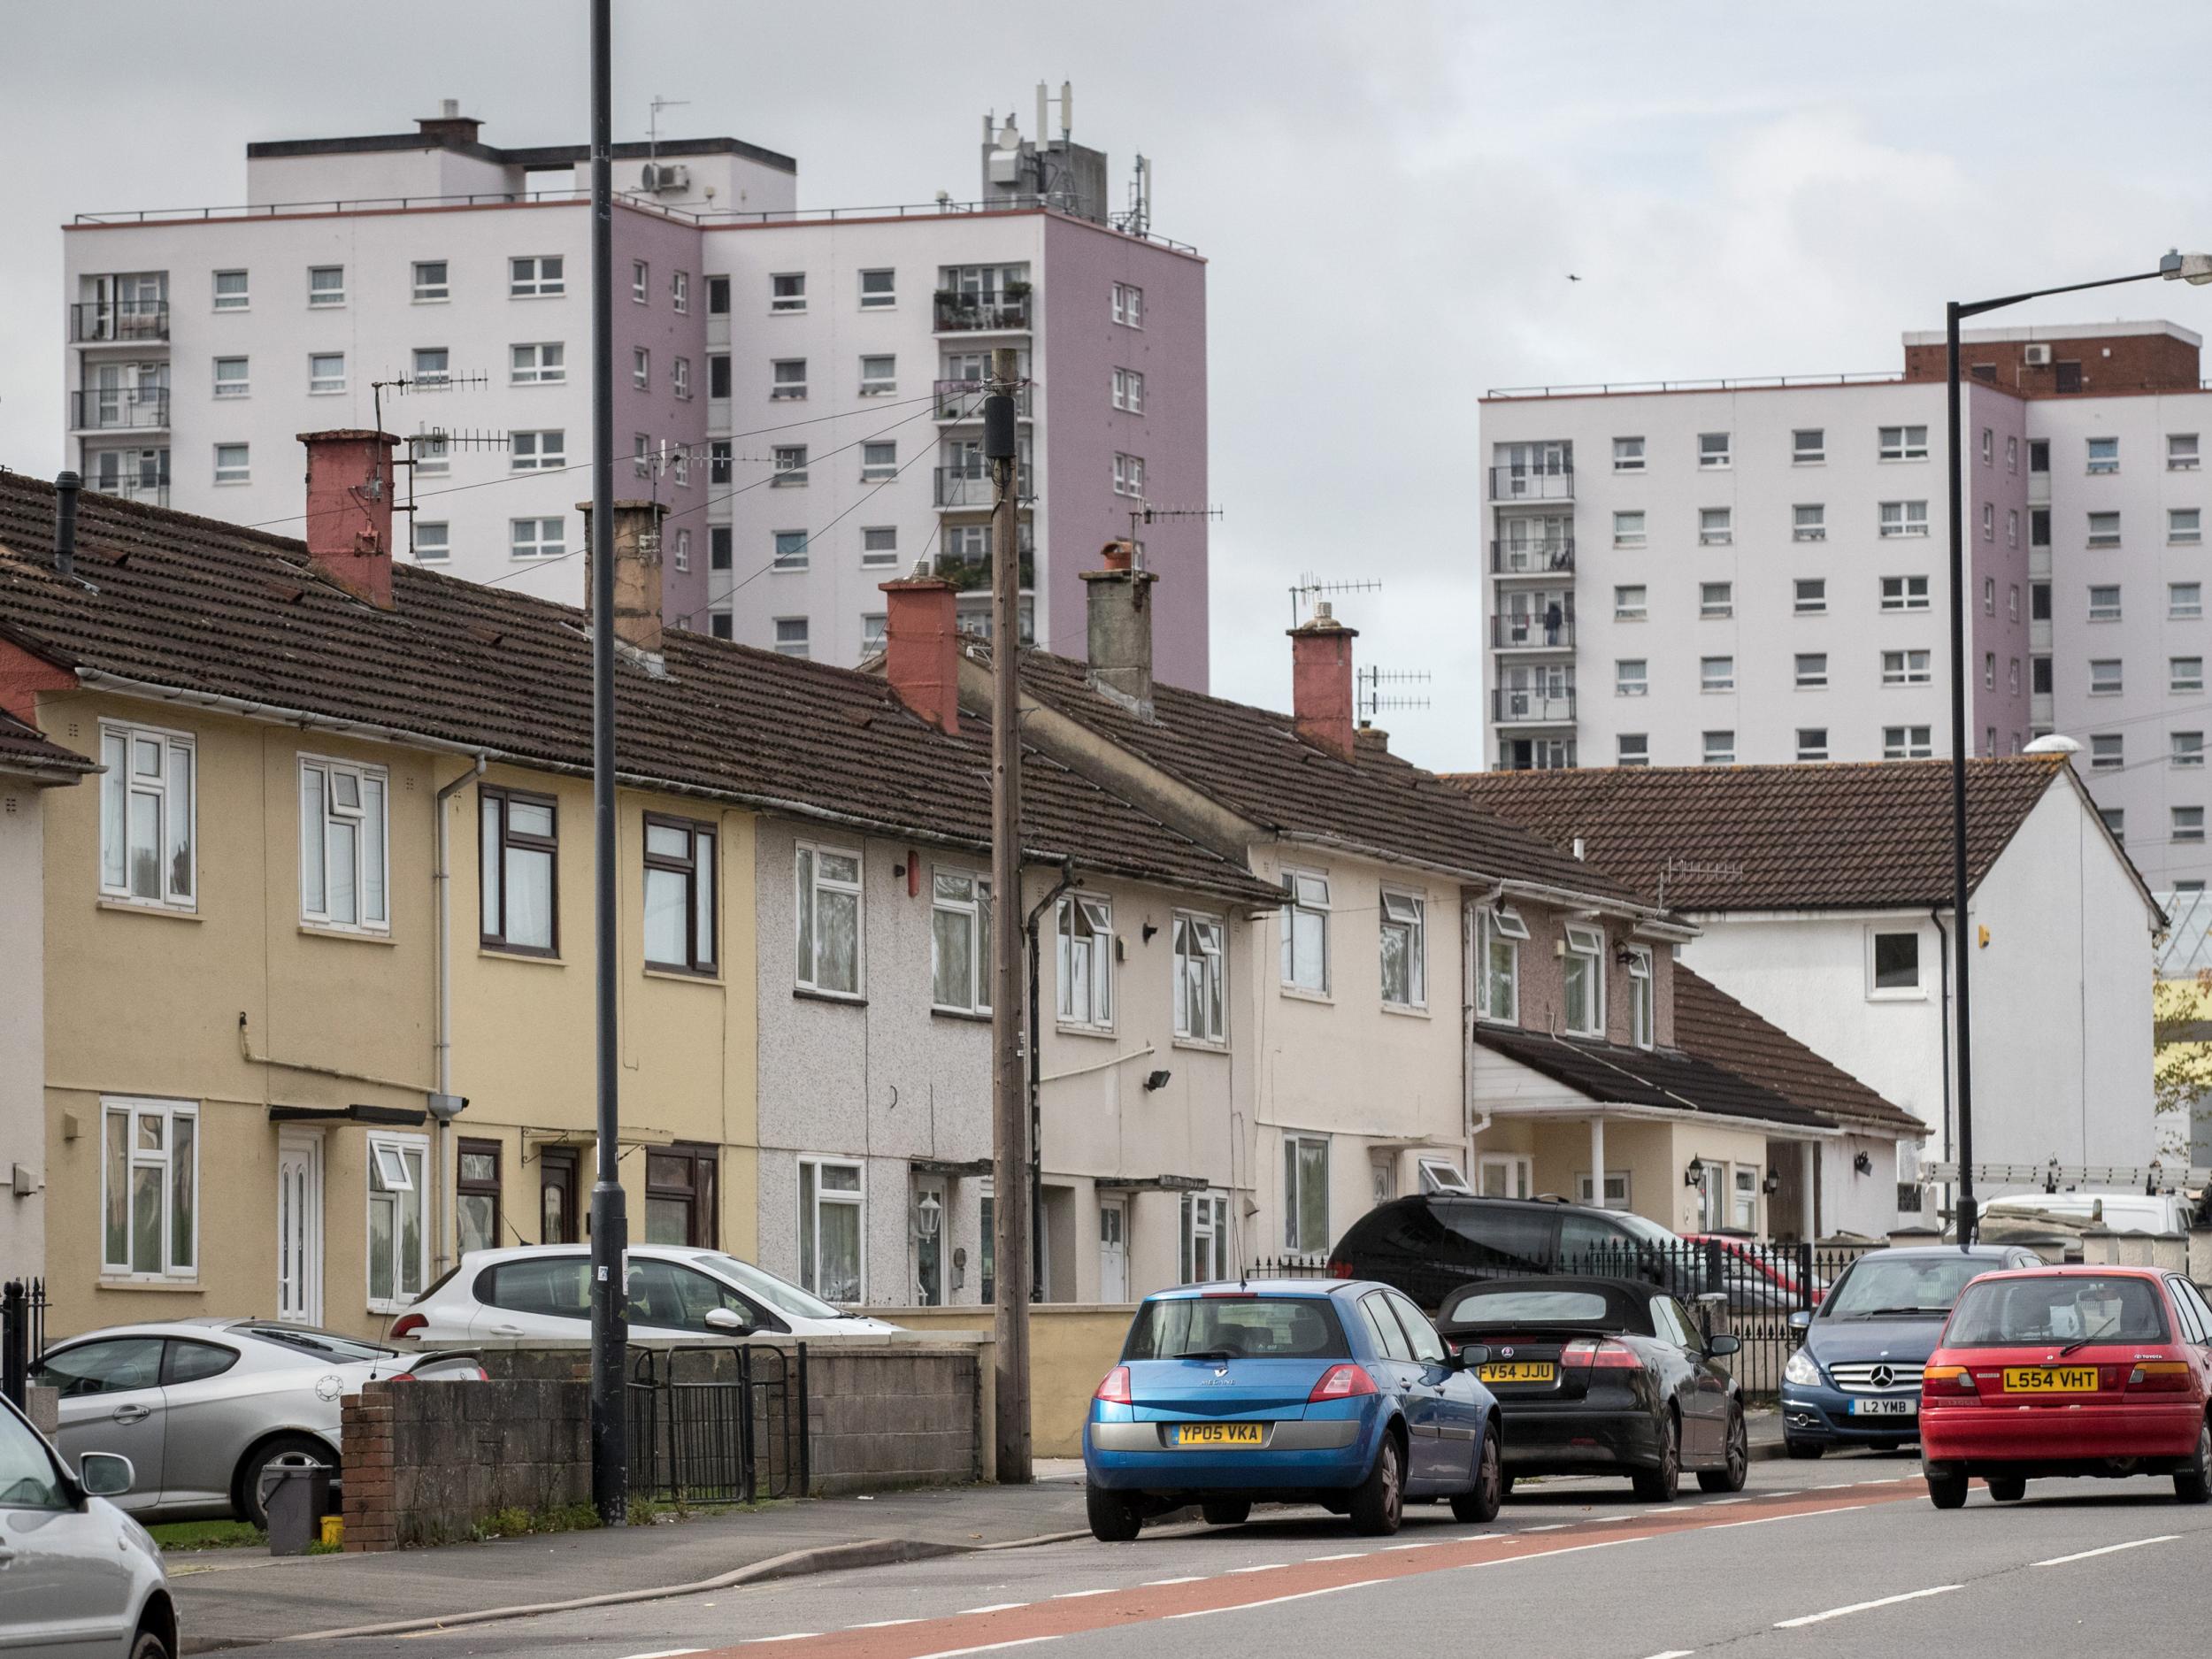 Government data reveals 283,000 households who rent privately are living in overcrowded conditions, an increase of 95 per cent in the last ten years